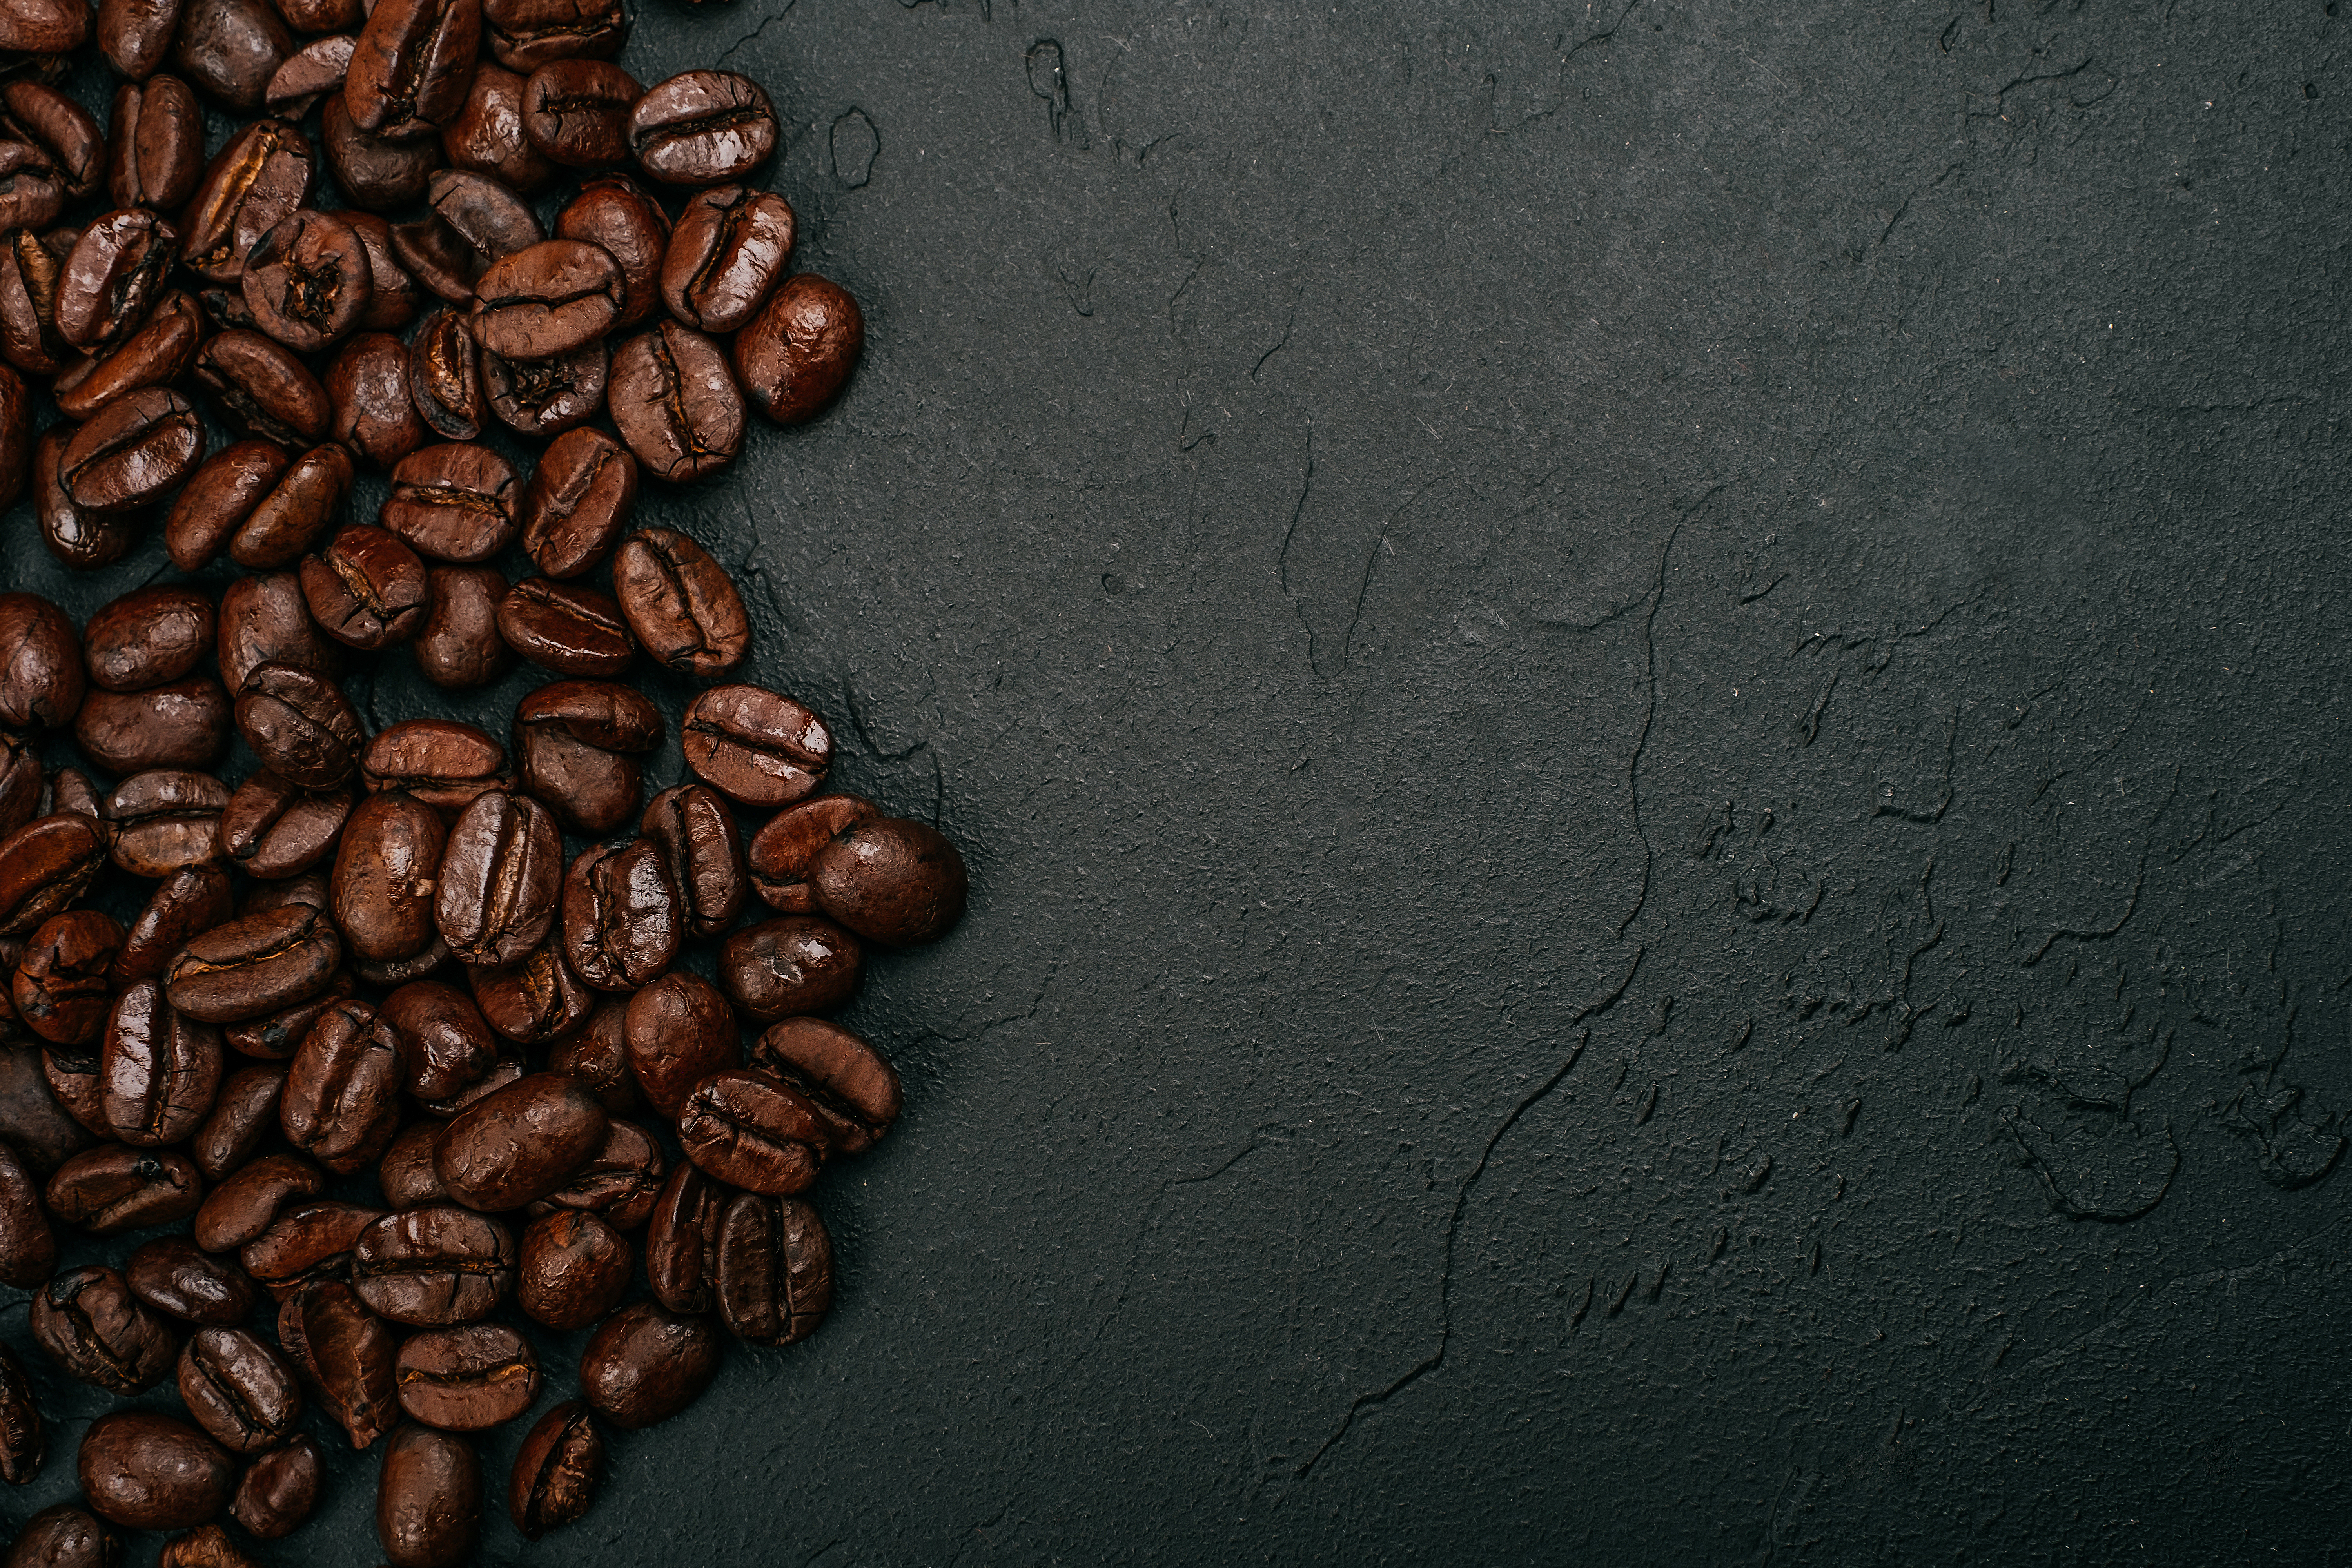 Roasted brown coffee beans on the black concrete stone background. Flatlay style, messy pattern.